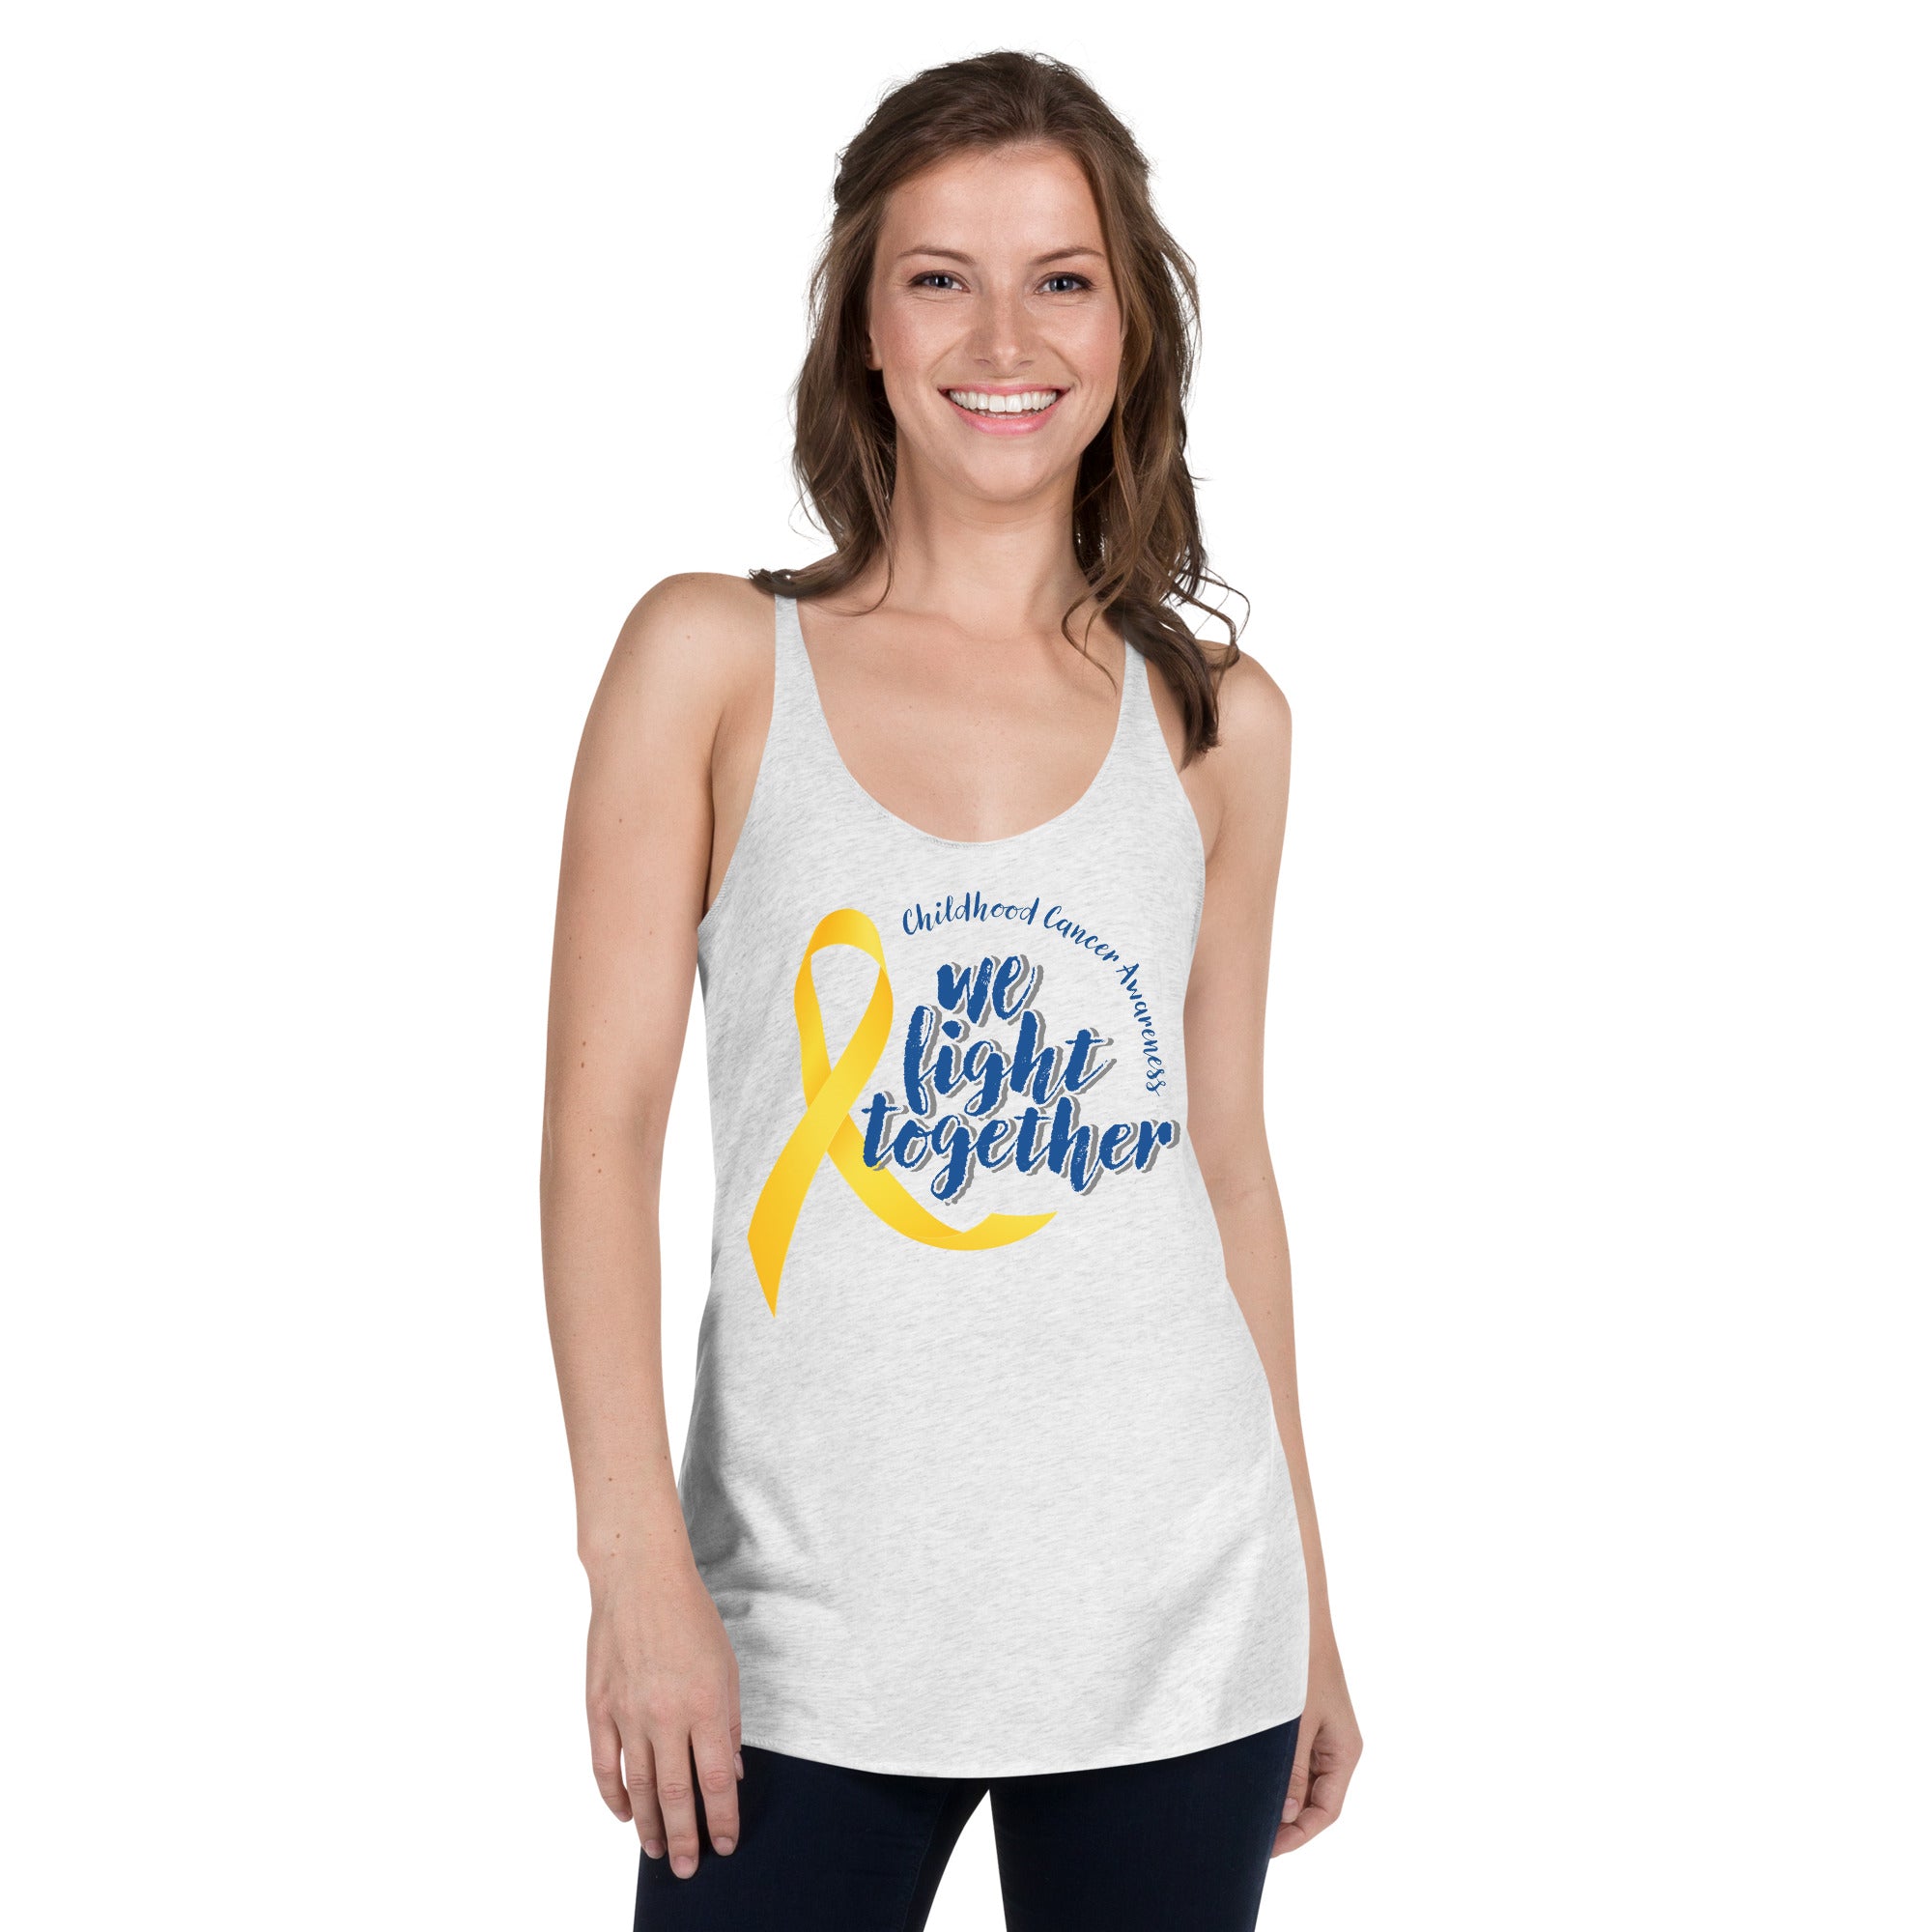 We Fight Together - Women's Racerback Tank